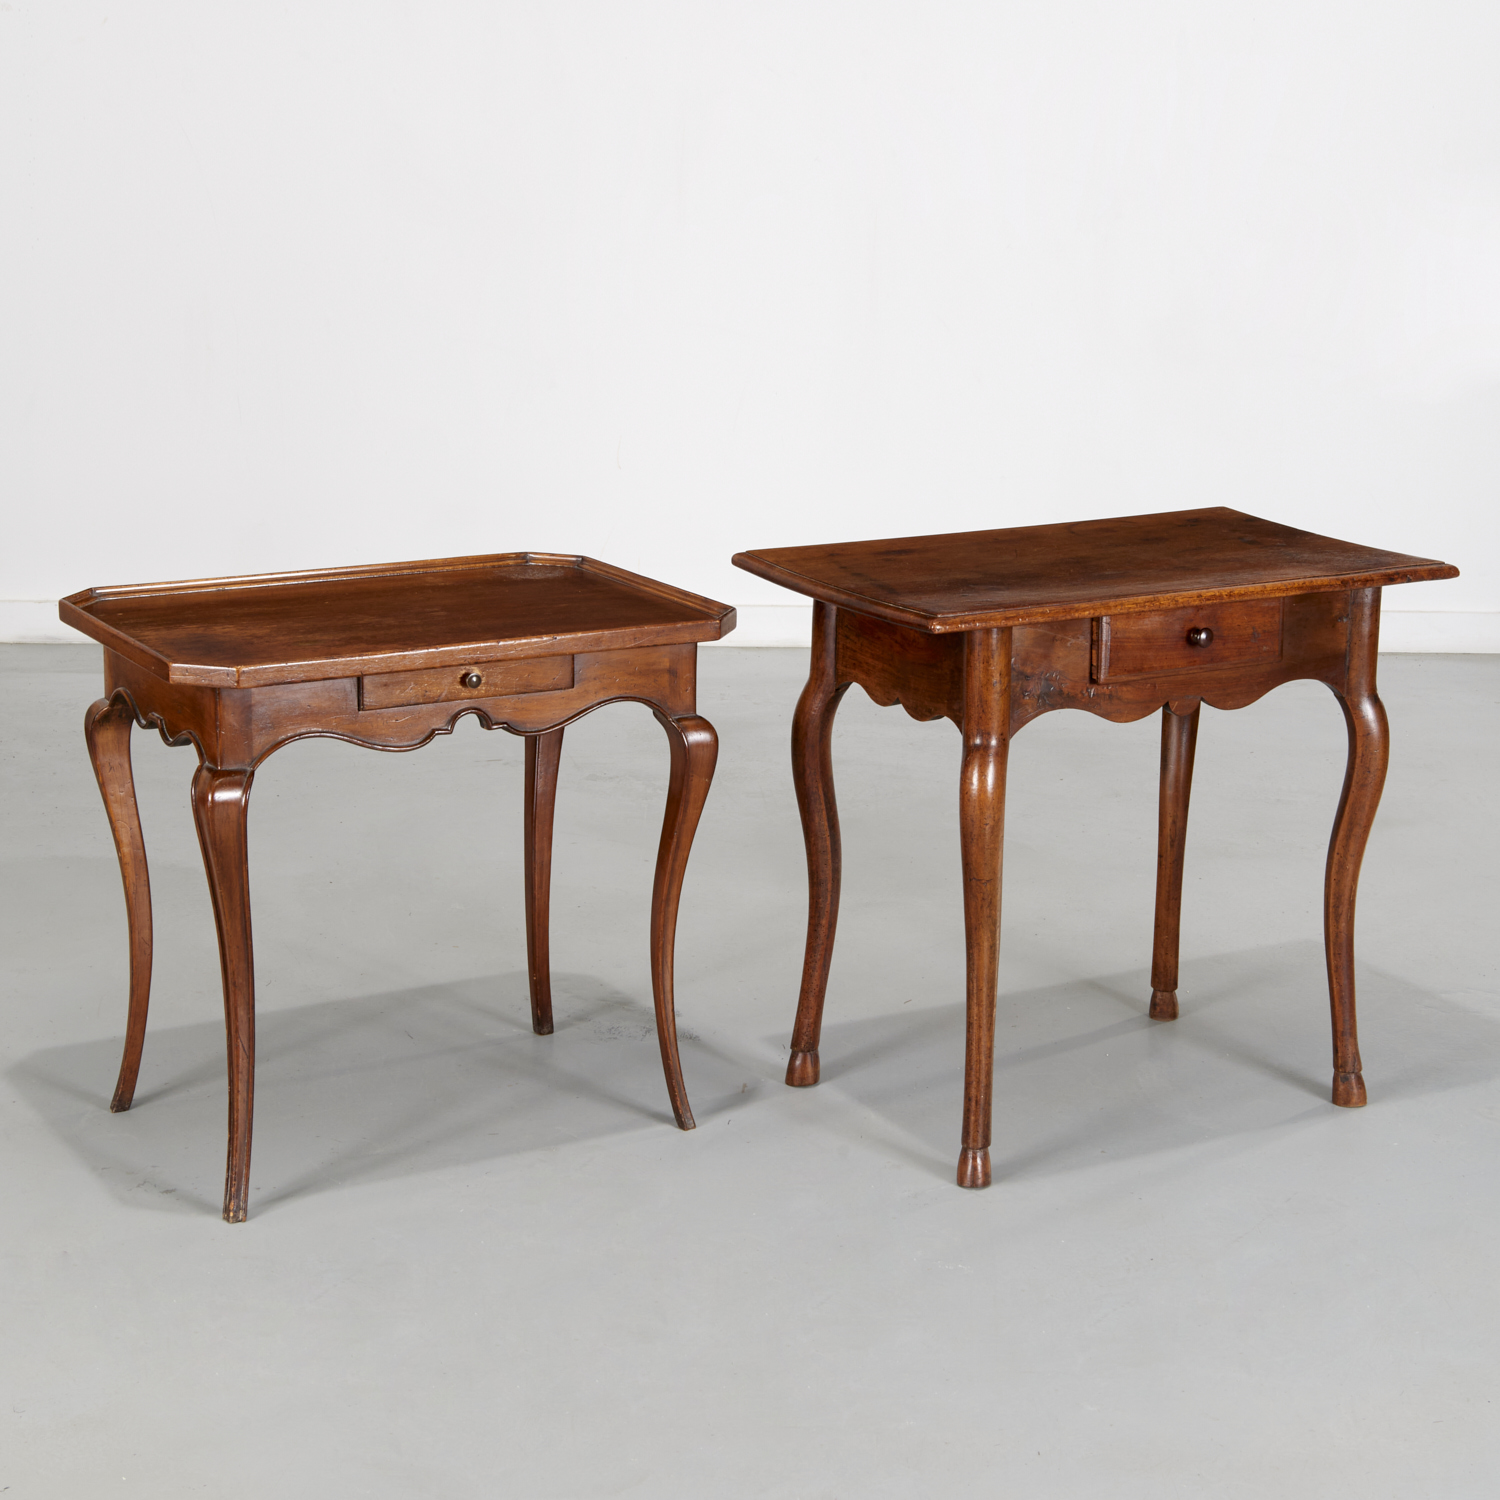  2 PROVINCIAL FRENCH SIDE TABLES 2fc373